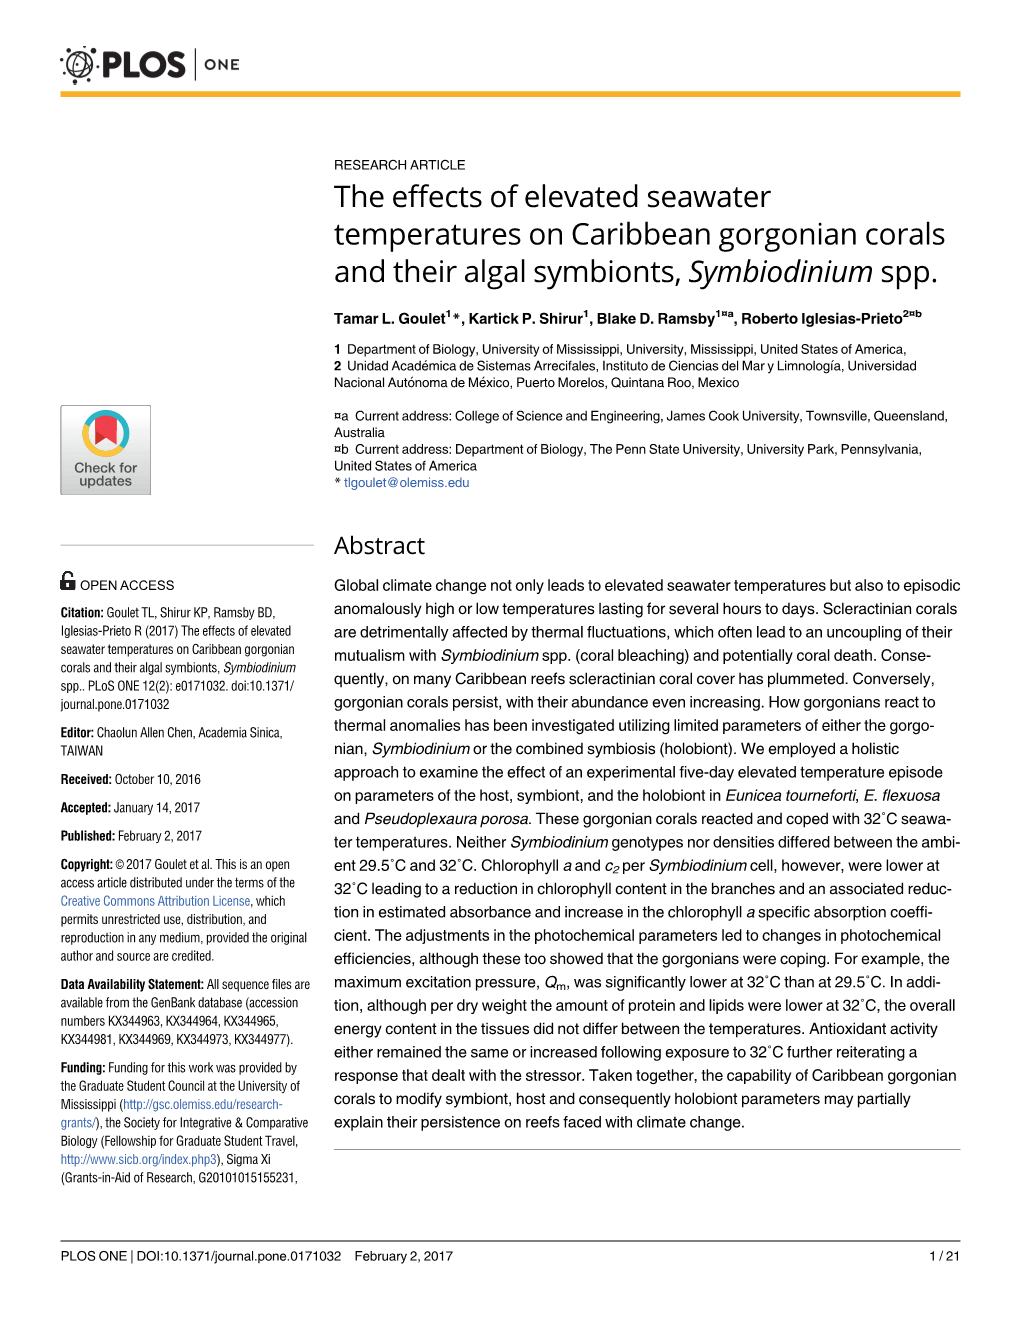 The Effects of Elevated Seawater Temperatures on Caribbean Gorgonian Corals and Their Algal Symbionts, Symbiodinium Spp